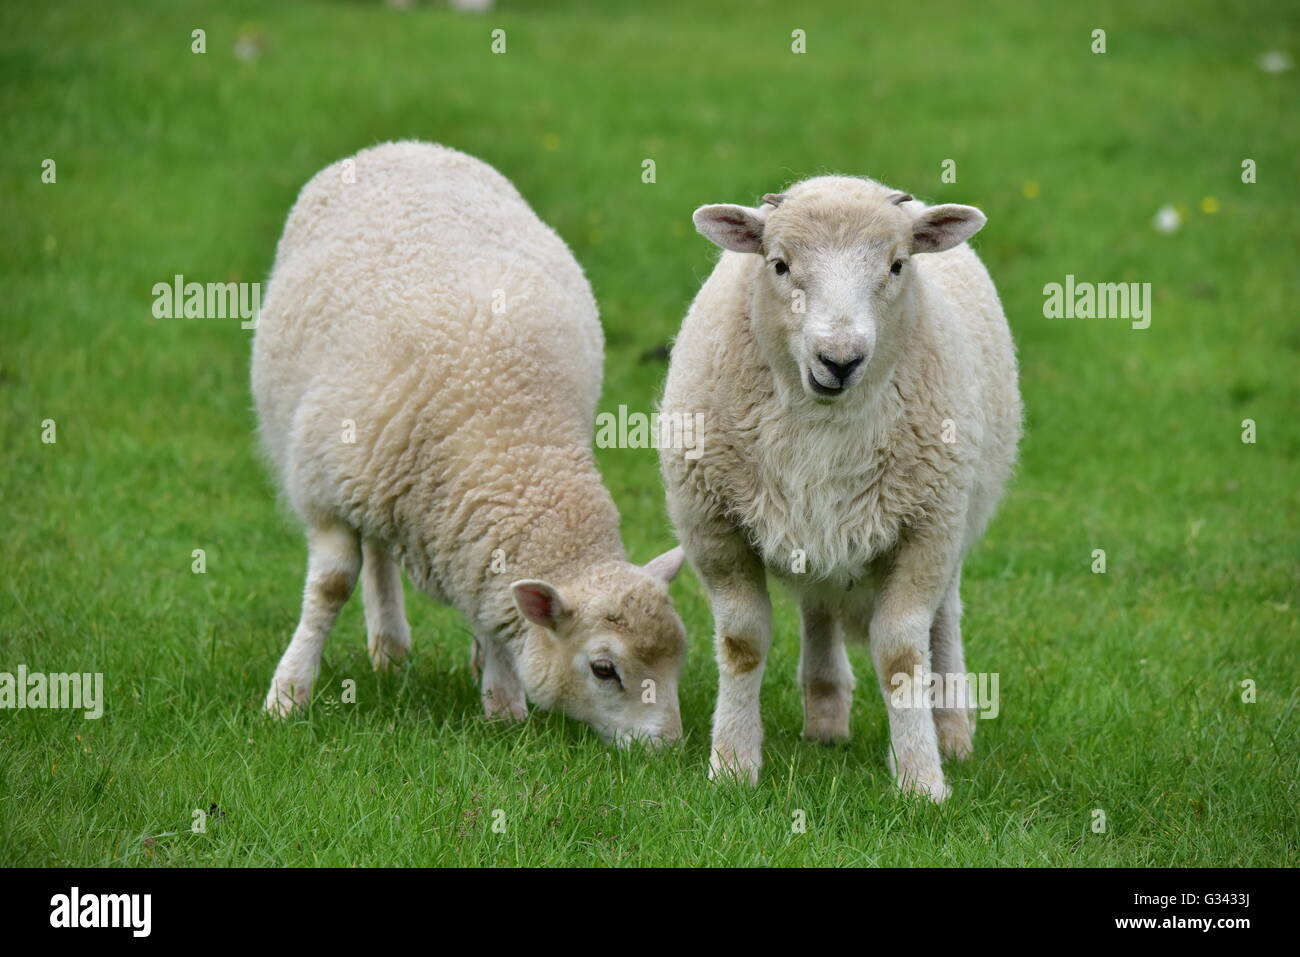 Two Welsh lambs grazing on lush fresh grass in a field. Stock Photo